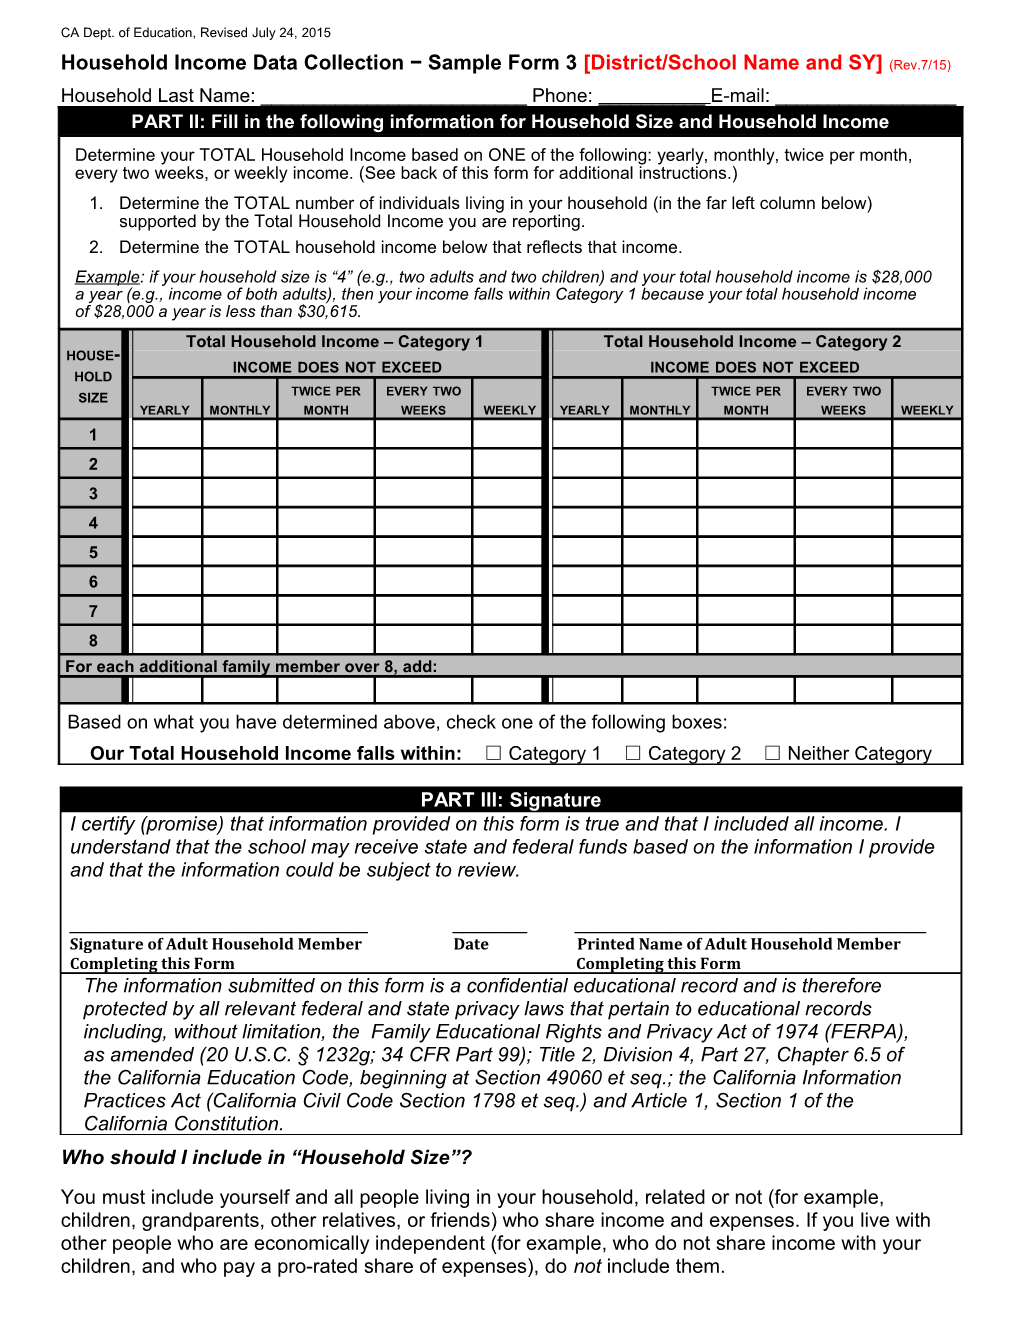 Household Income Data Collection Sample Form 3 Local Control Fundng Formula (CA Dept Of